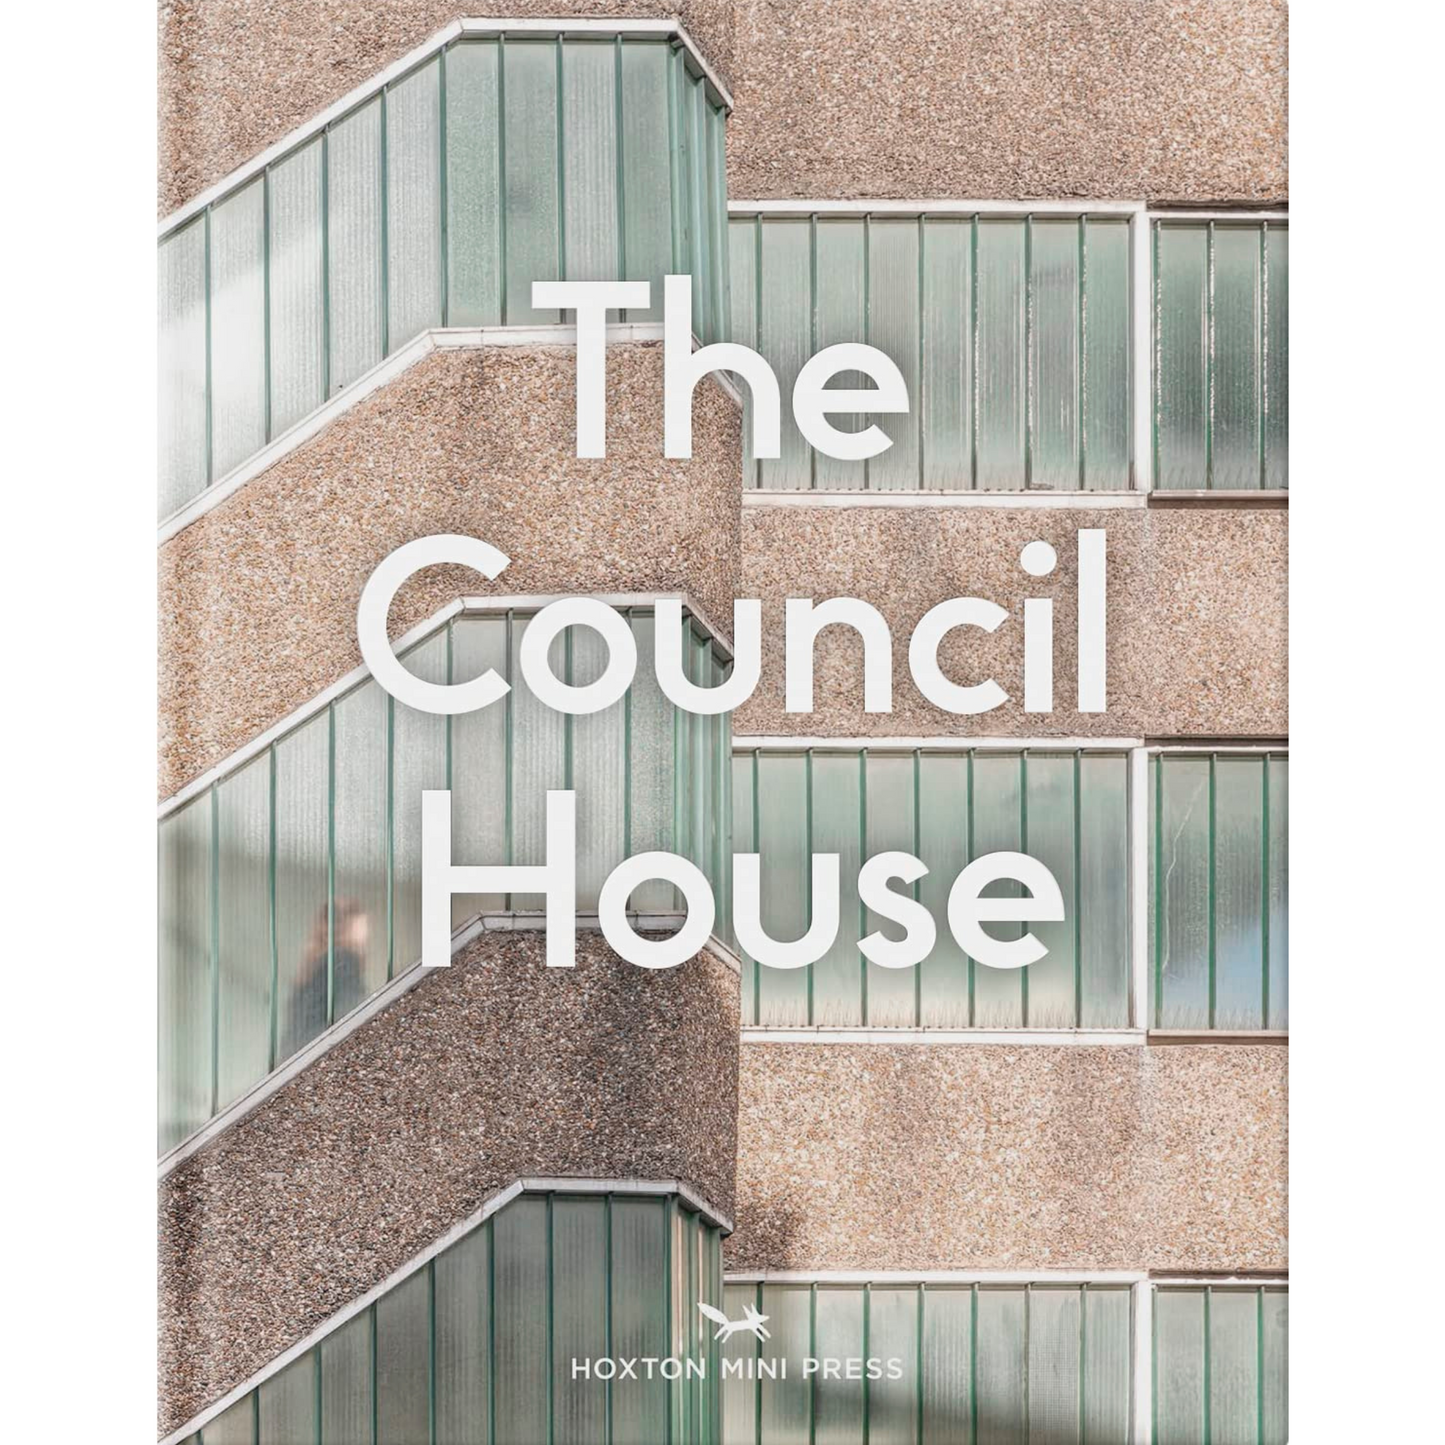 The Council House book front cover featuring a council house building behind the book title text